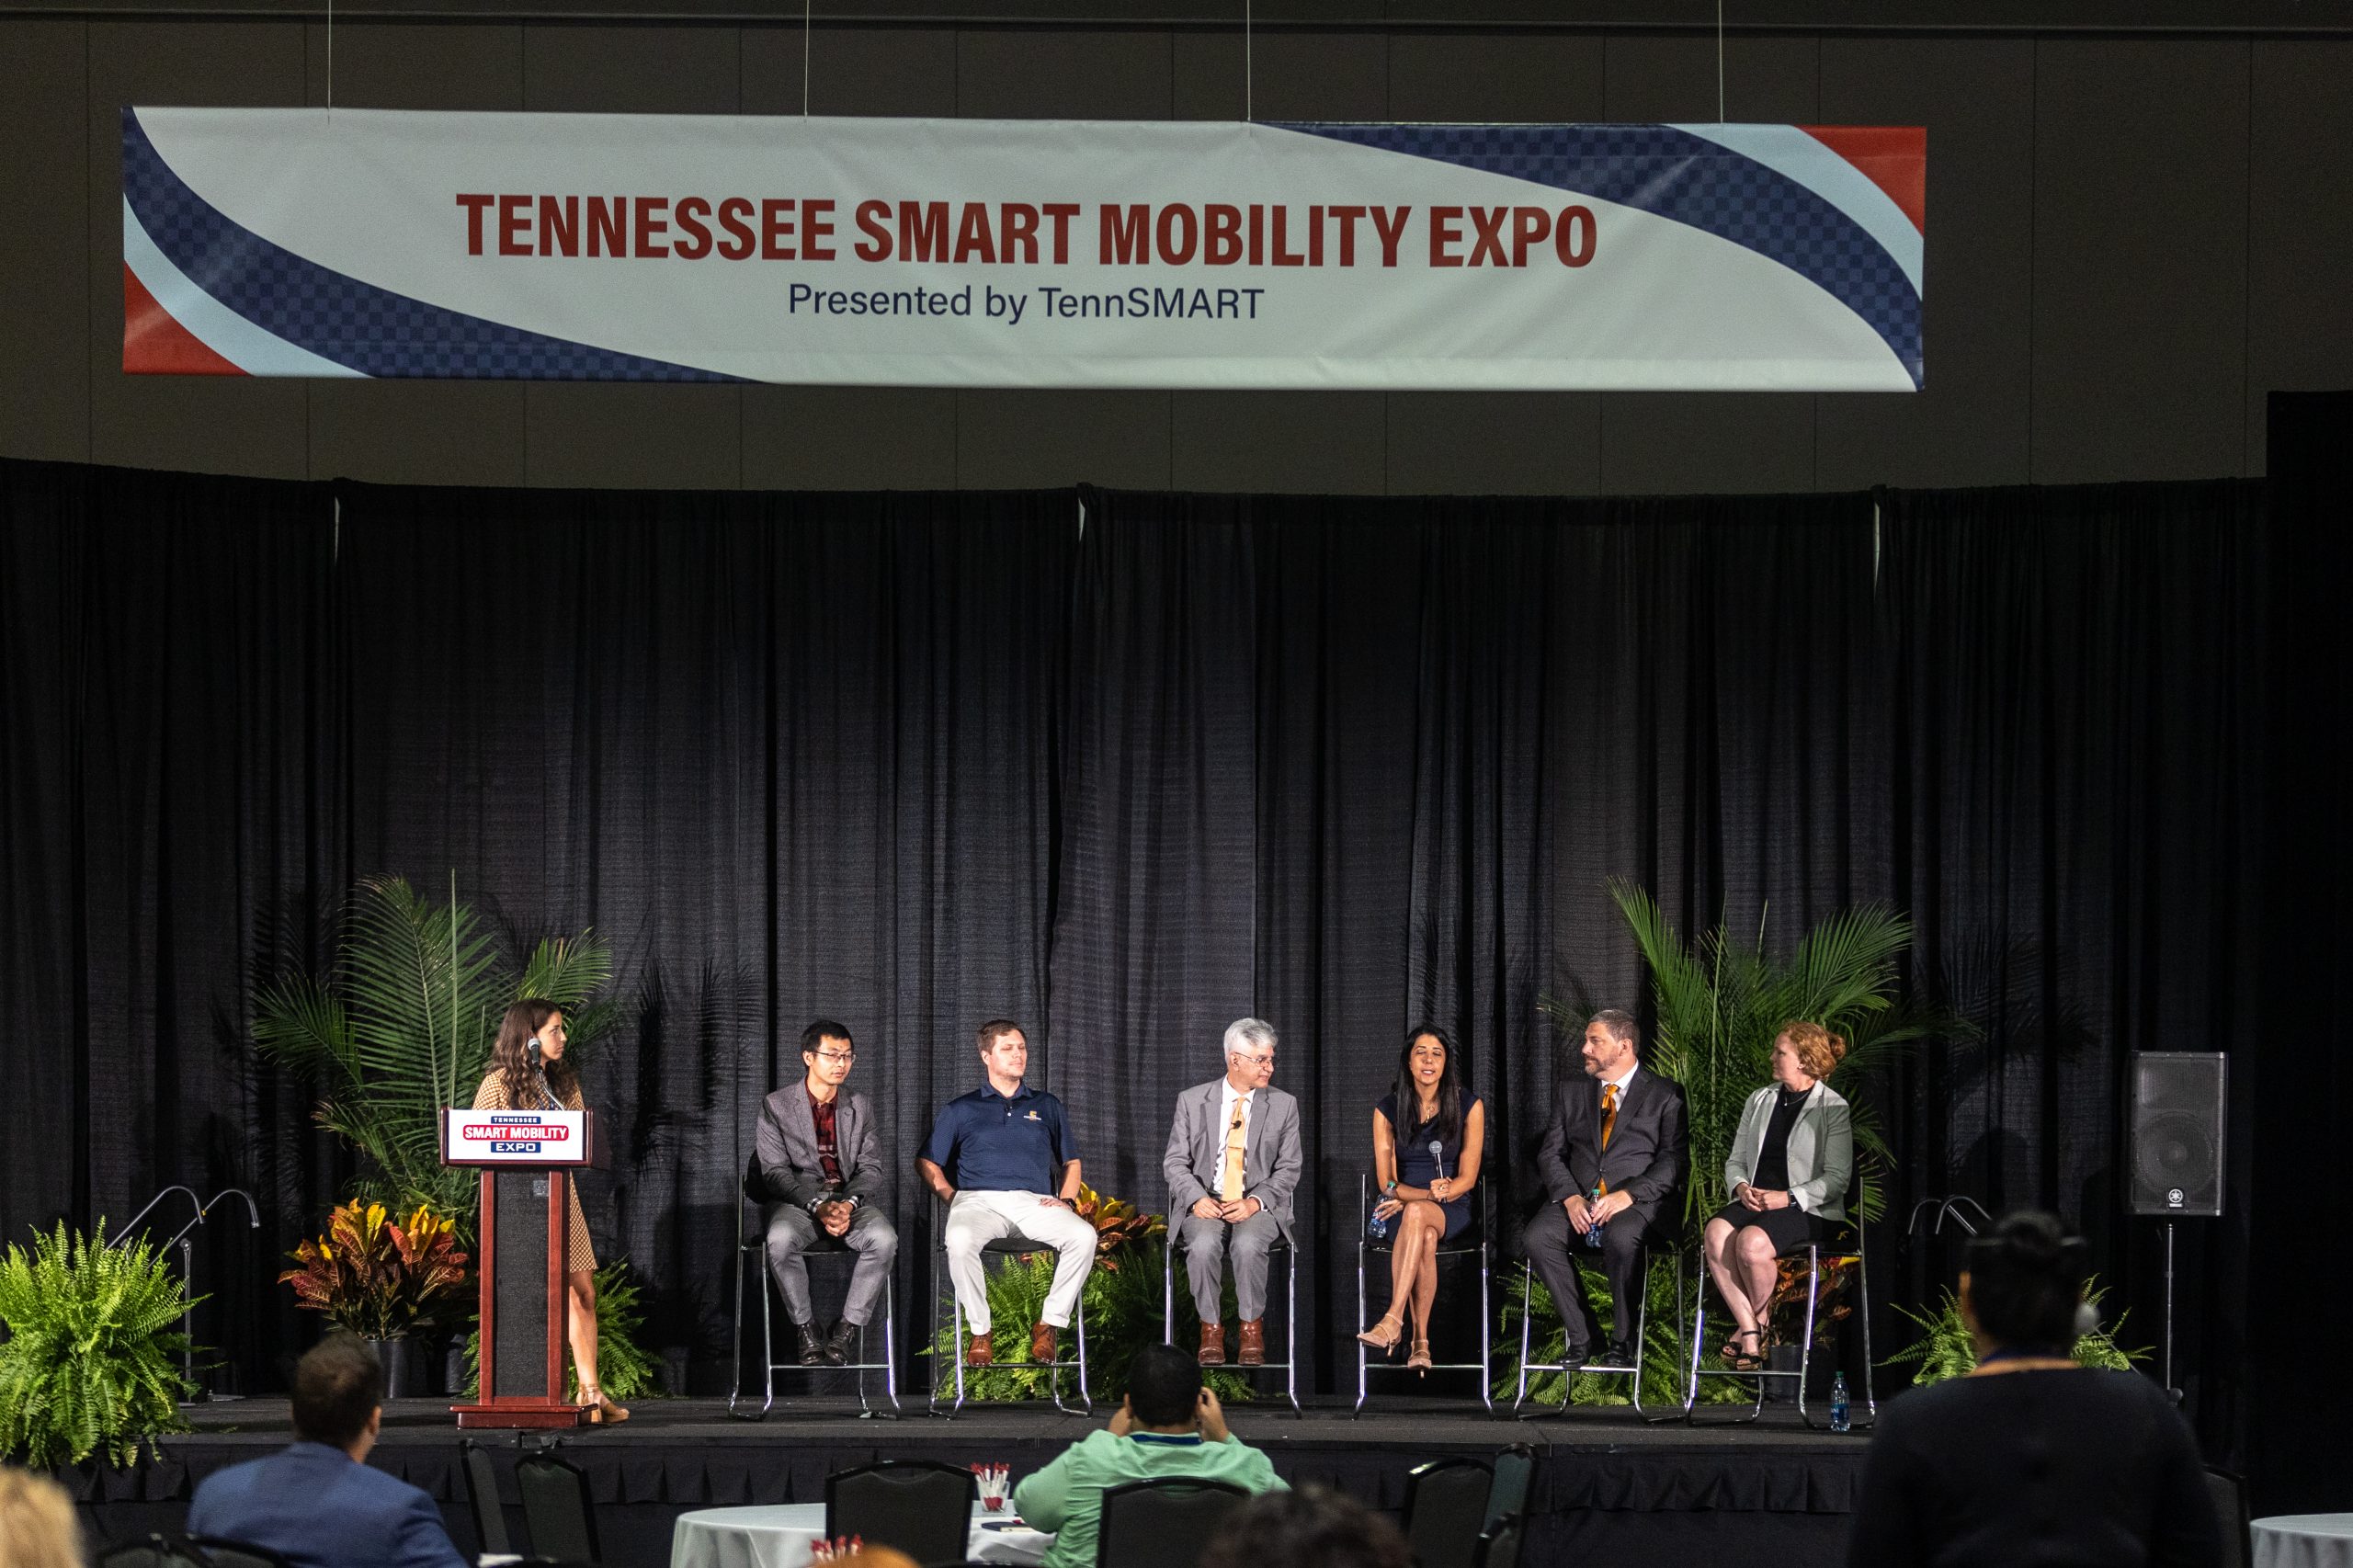 Vanderbilt faculty connect with regional partners, share interdisciplinary mobility, sustainability and resilience innovations at inaugural Tennessee Smart Mobility Expo